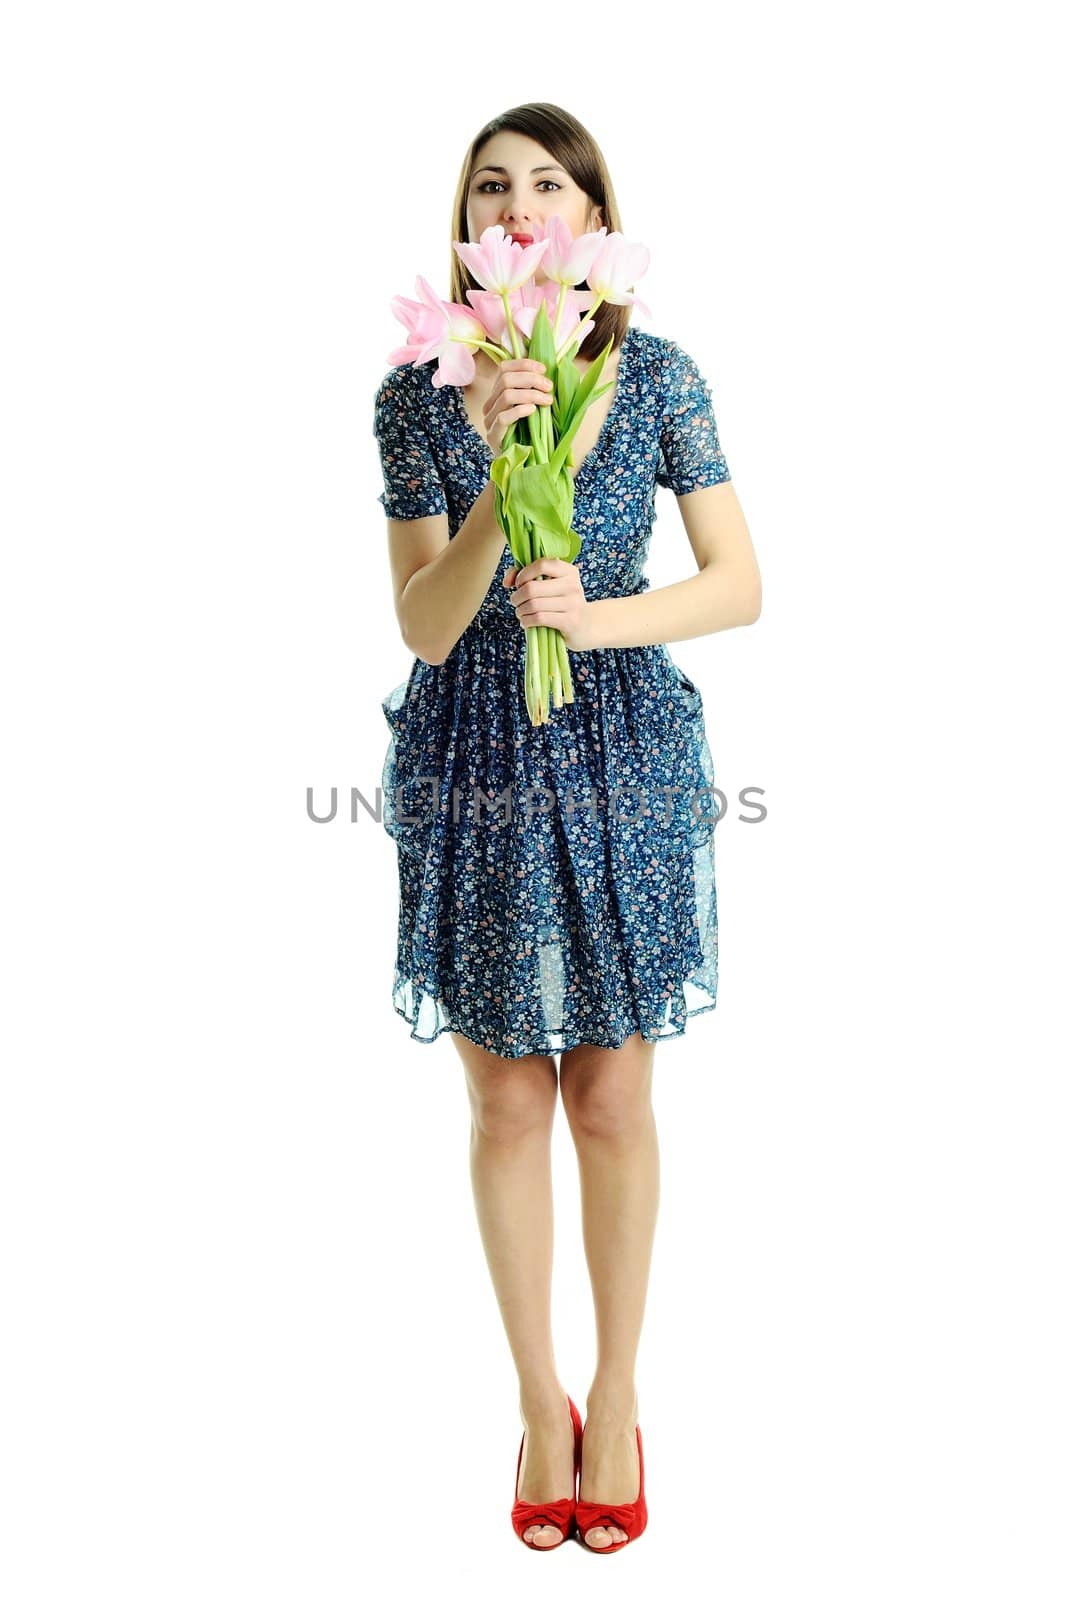 An image of a young pretty woman with pink flowers